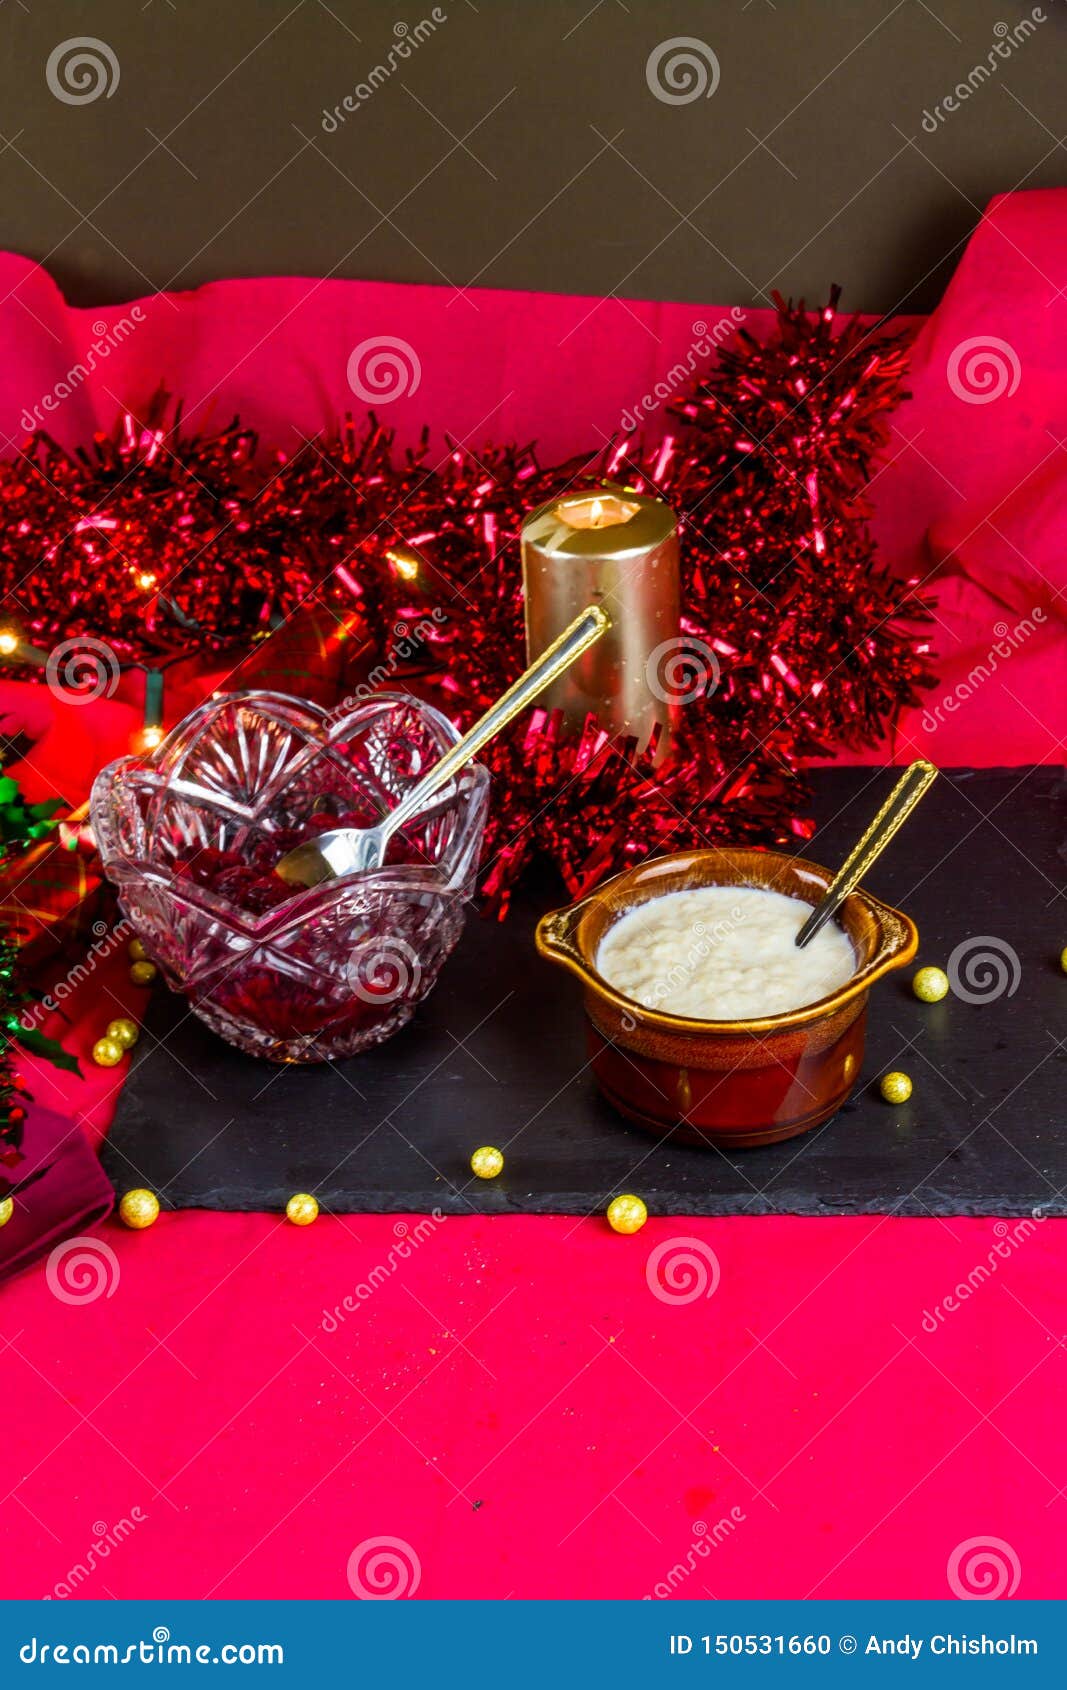 Cranberry And Bread Sauce In Bowls Ready For Christmas Landscape Stock Photo Image Of Berries Compote 150531660